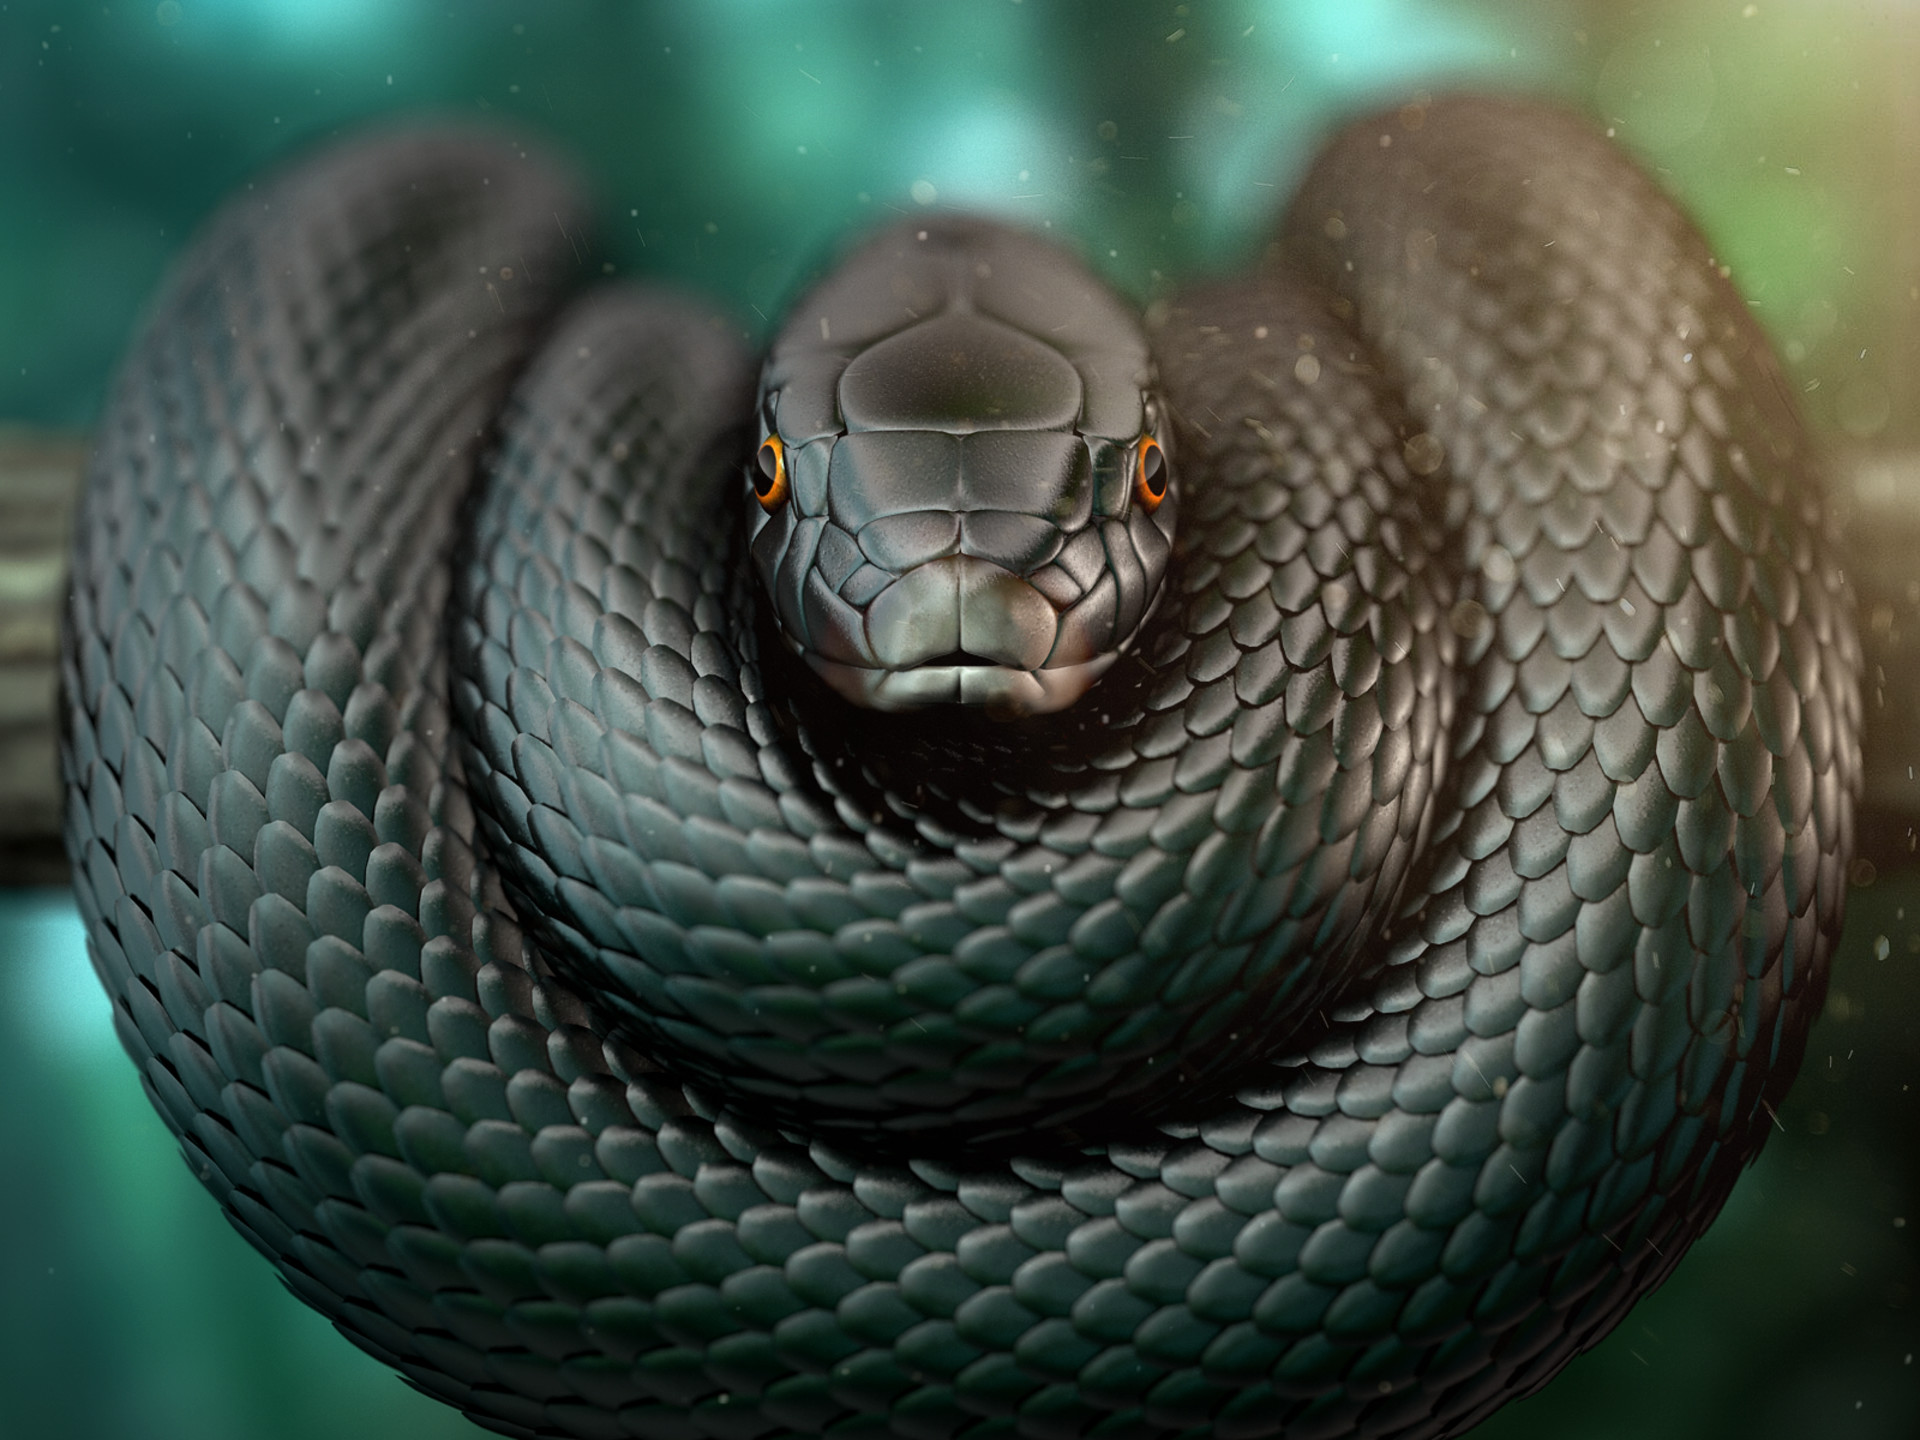 1920x1440 ... Wallpapers Black Mamba Widescreen Pictures Of Black Mamba